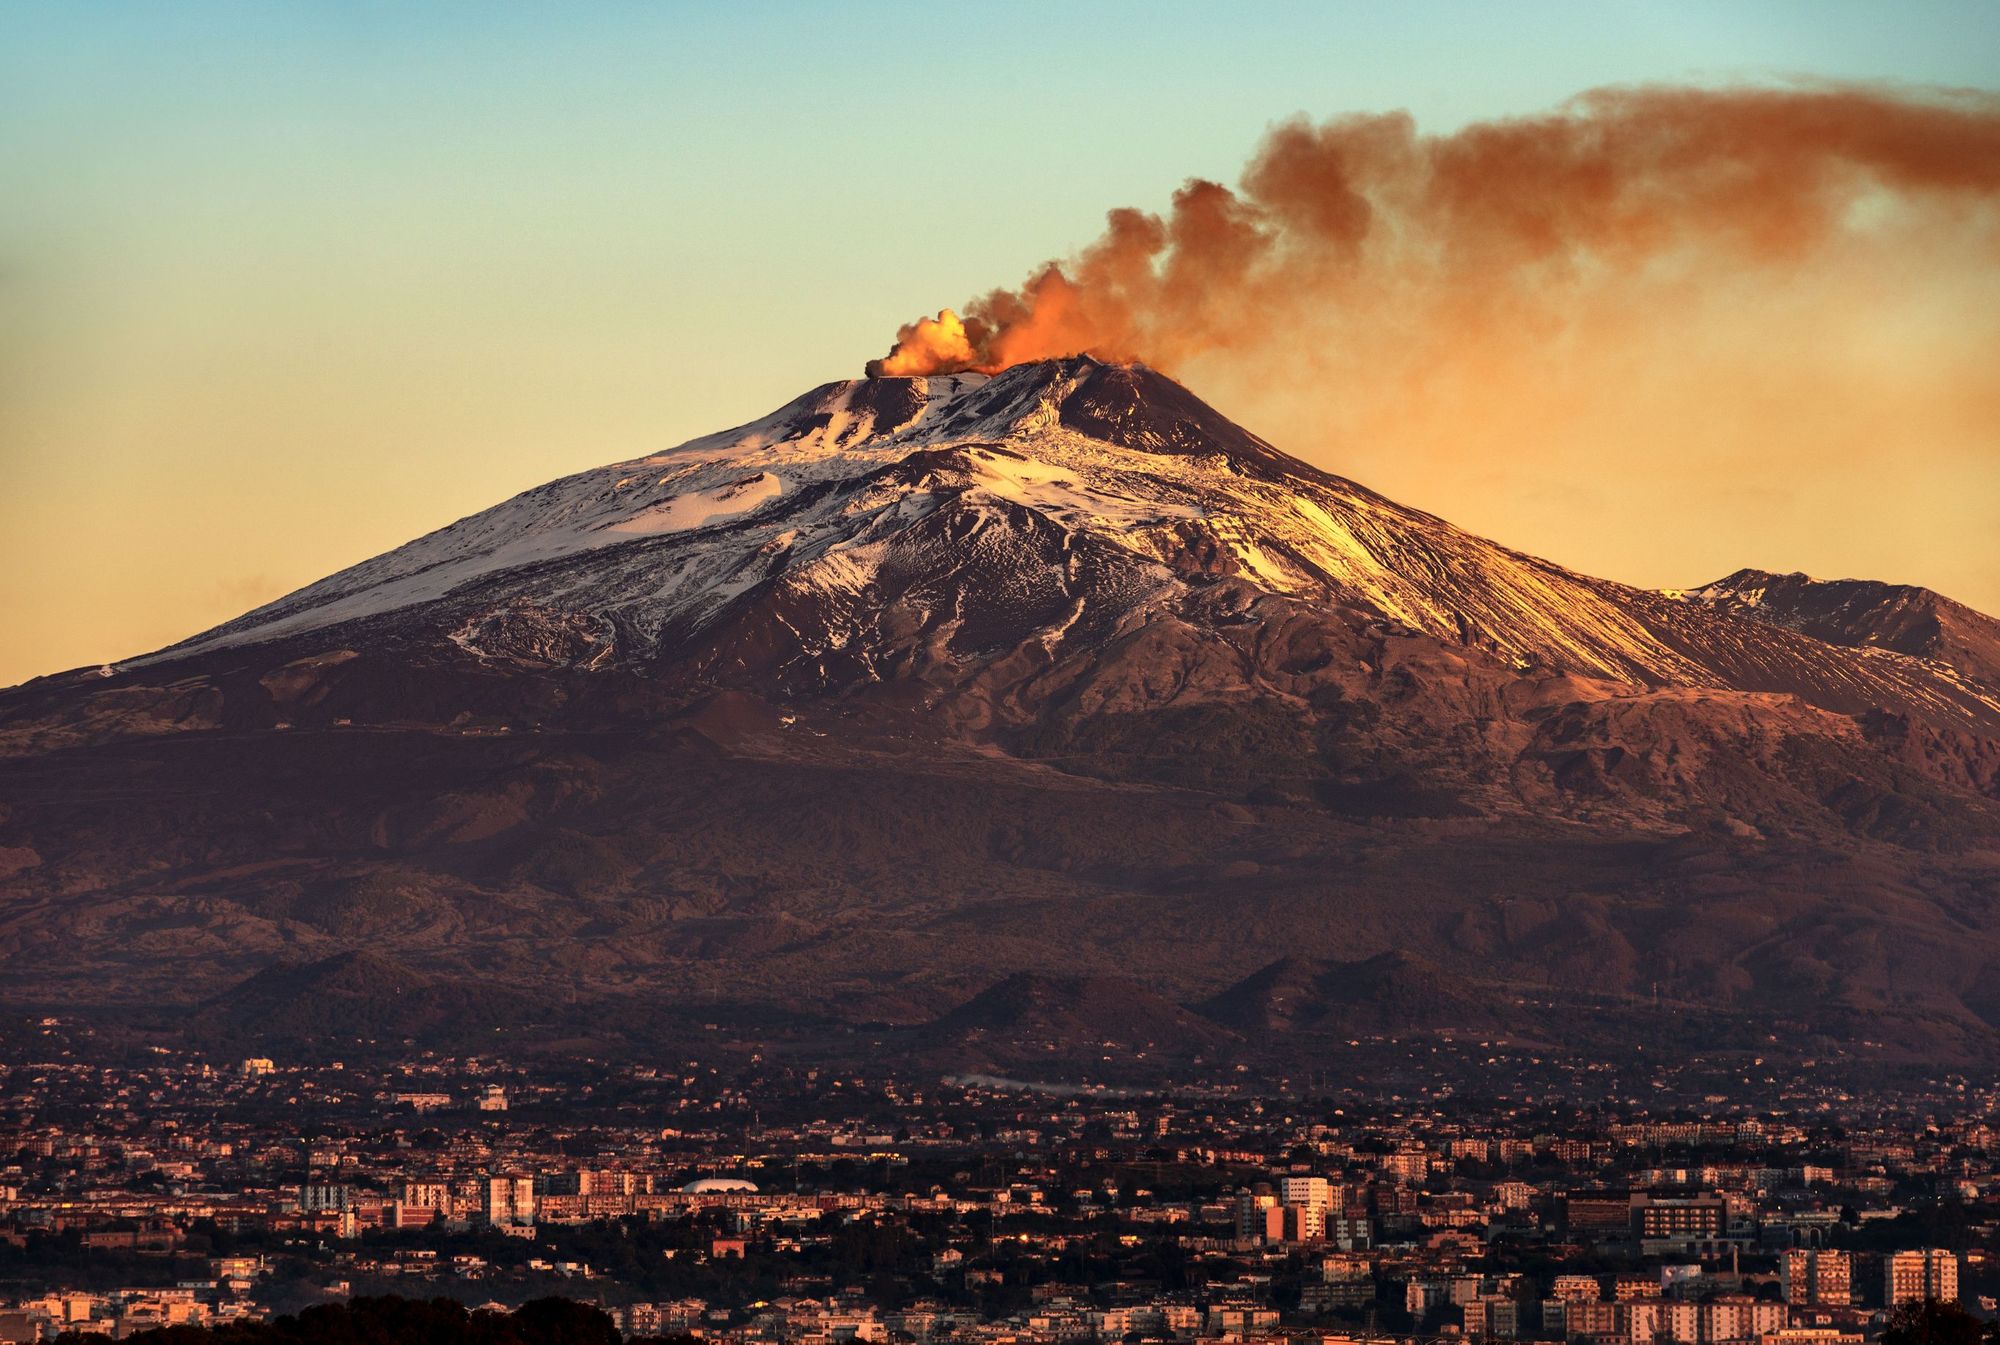 The towering lump of Mount Etna, the highest mountain on Sicily, toweing over the city of Catania. Photo: Getty